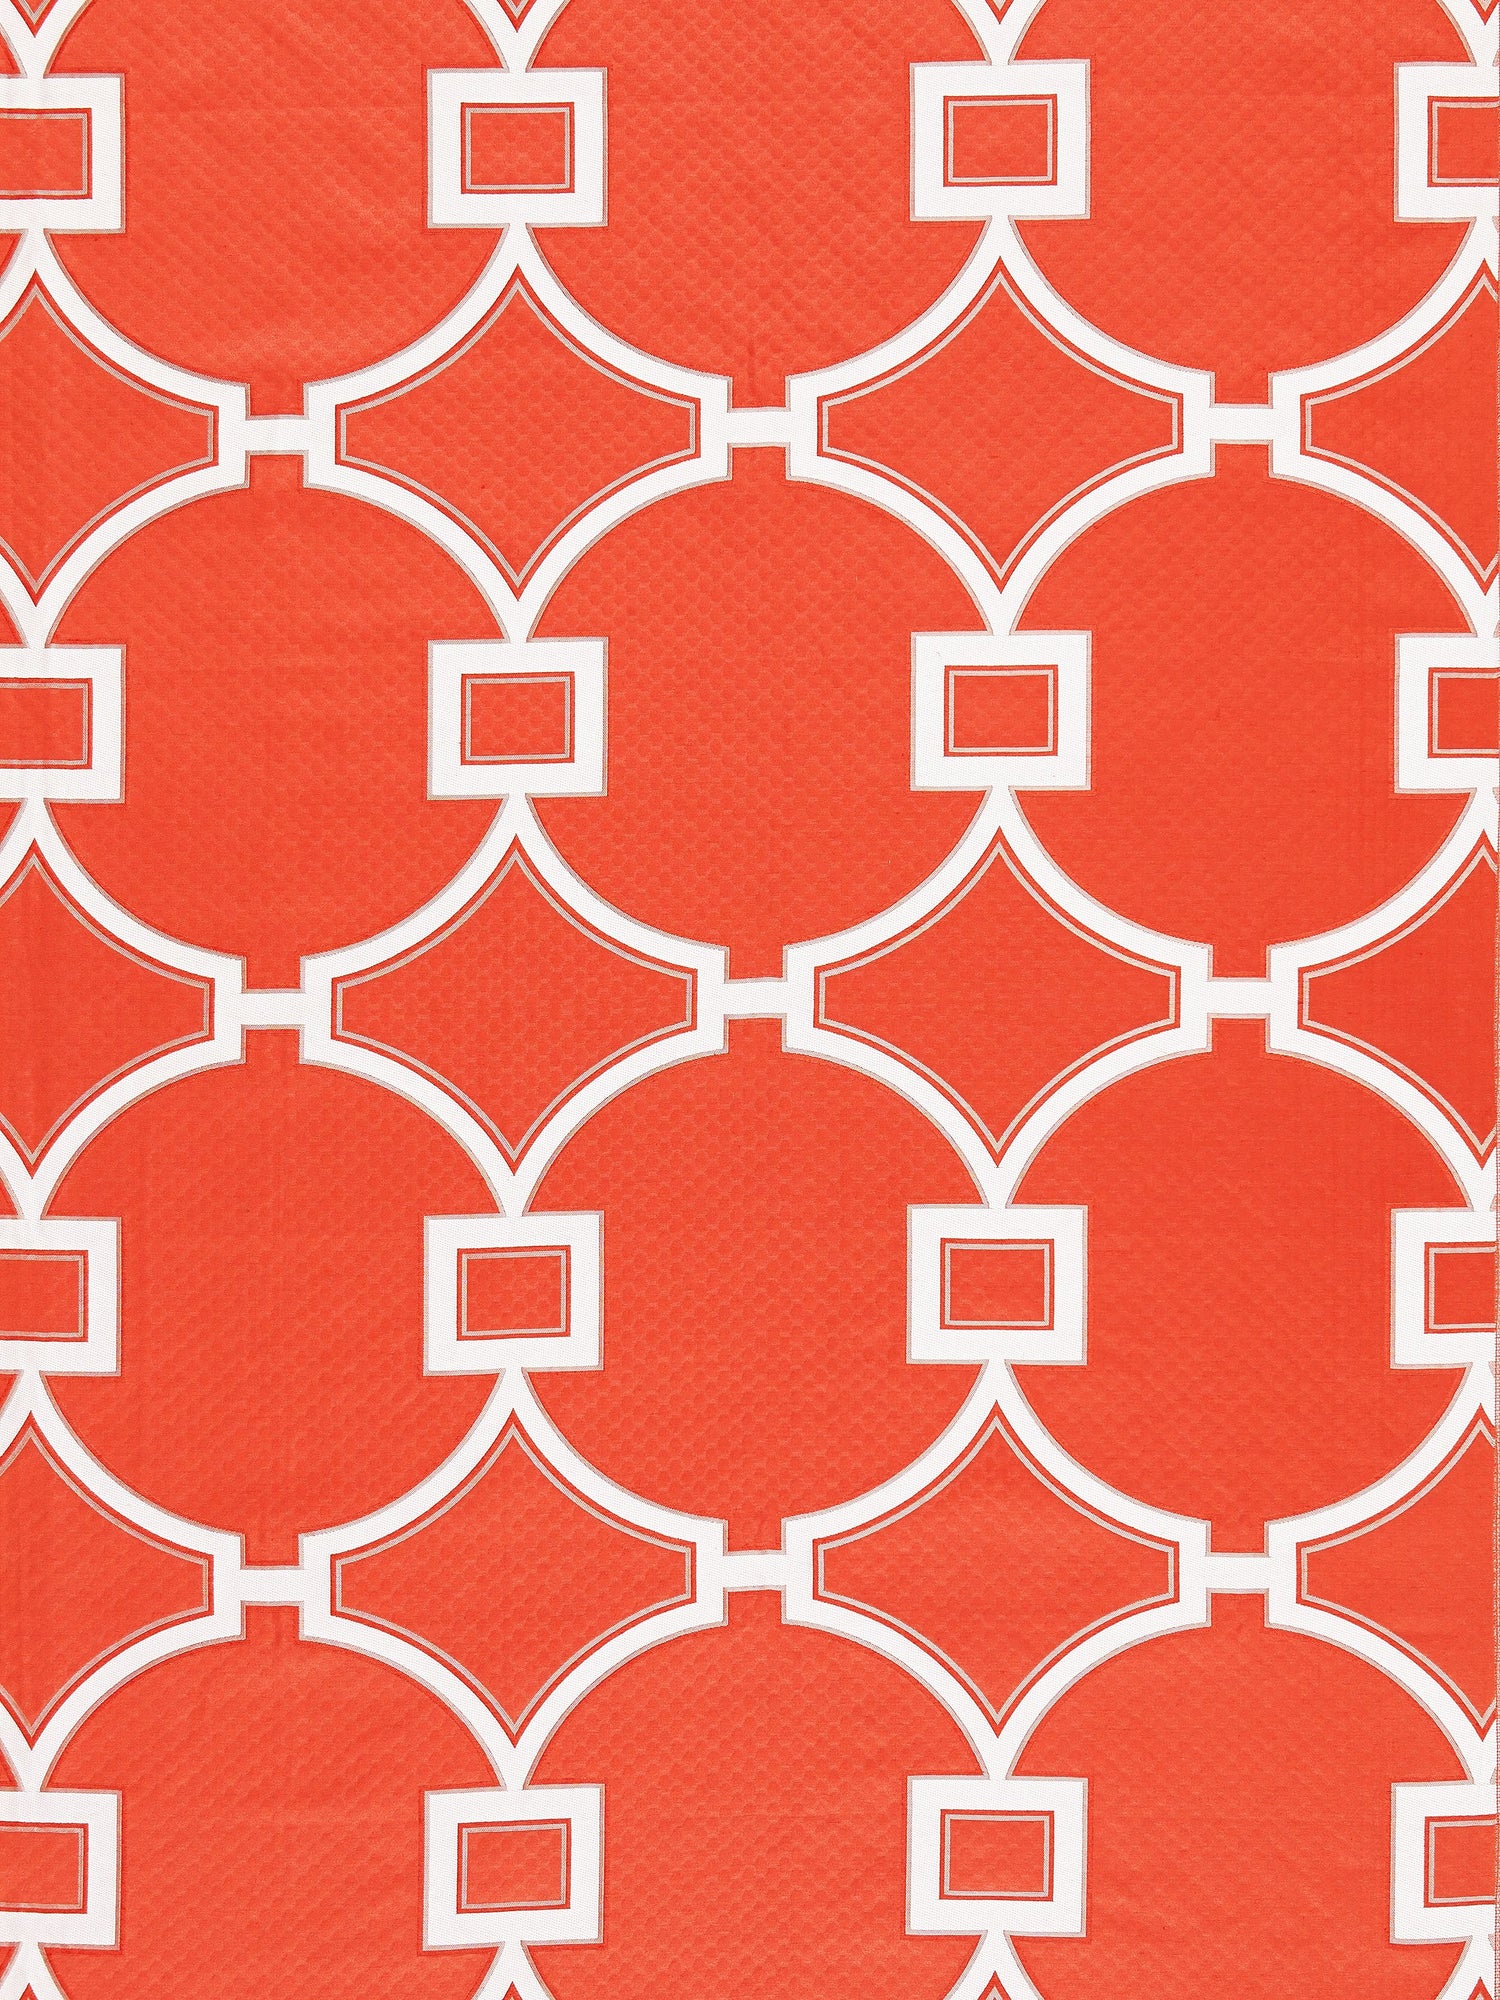 Circle Fret fabric in coral color - pattern number SC 000327072 - by Scalamandre in the Scalamandre Fabrics Book 1 collection